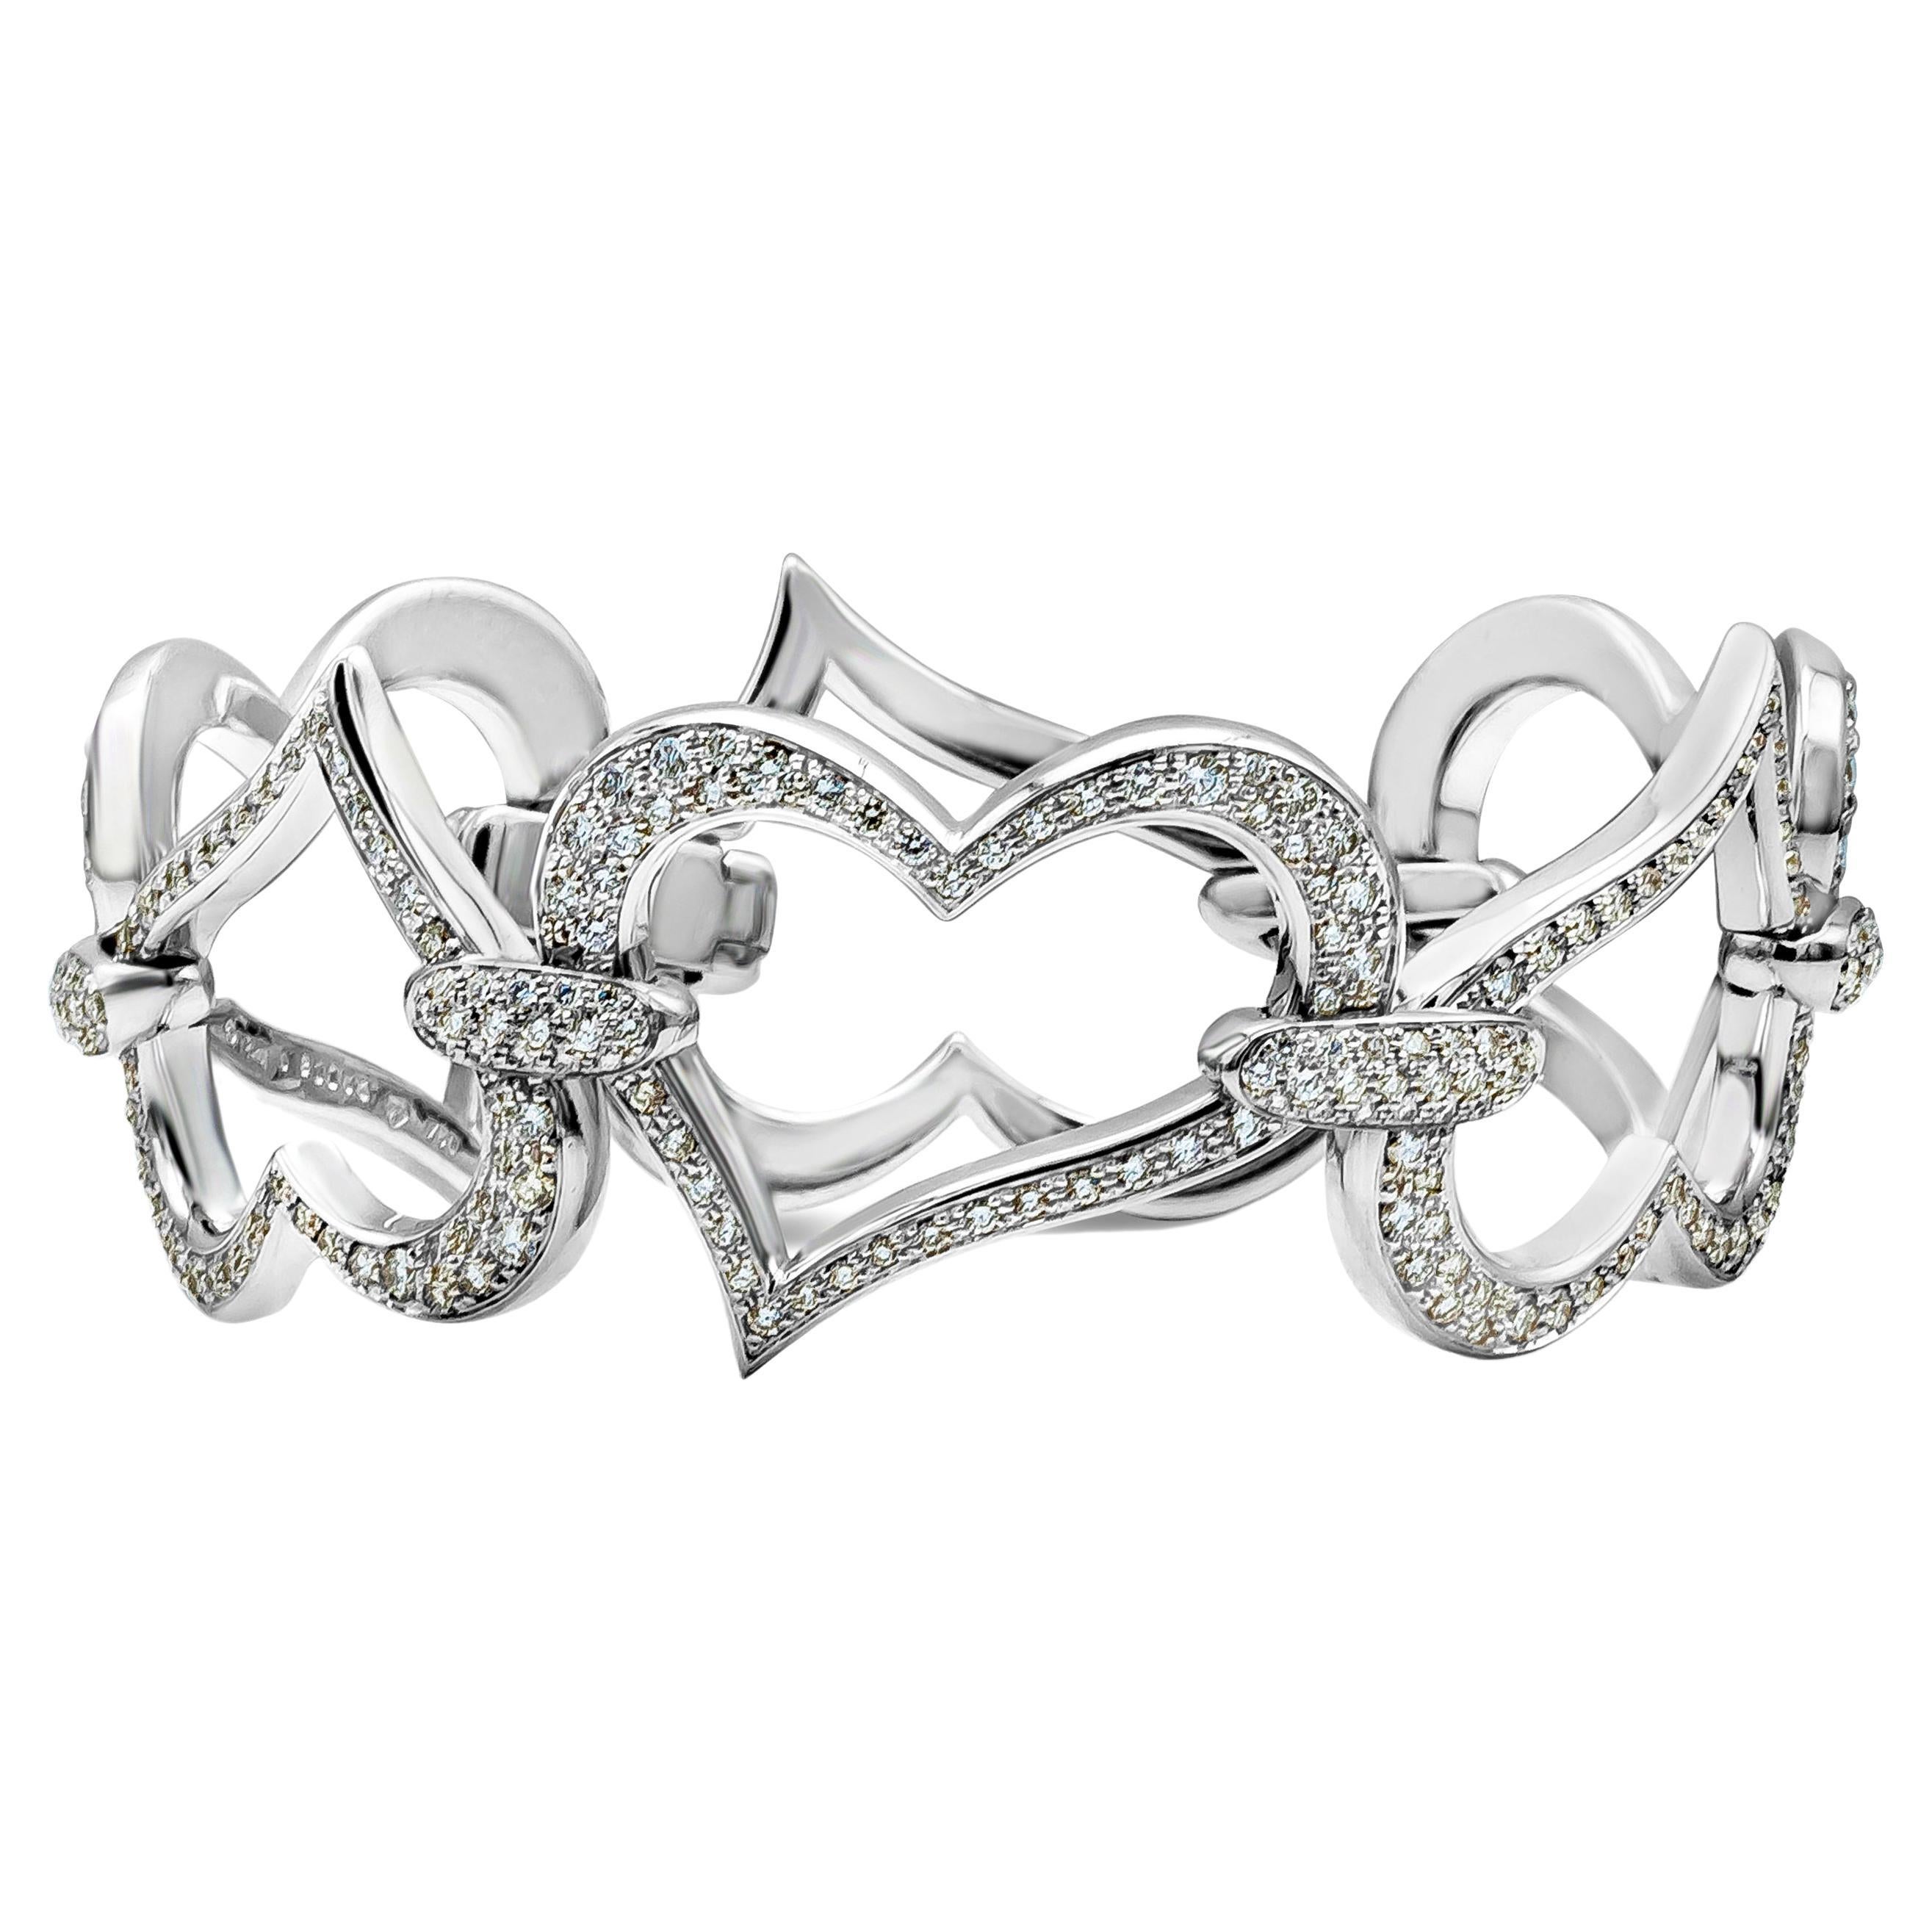 Piaget 4.70 Carat Round Diamond Link Heart Bracelet in White Gold For Sale